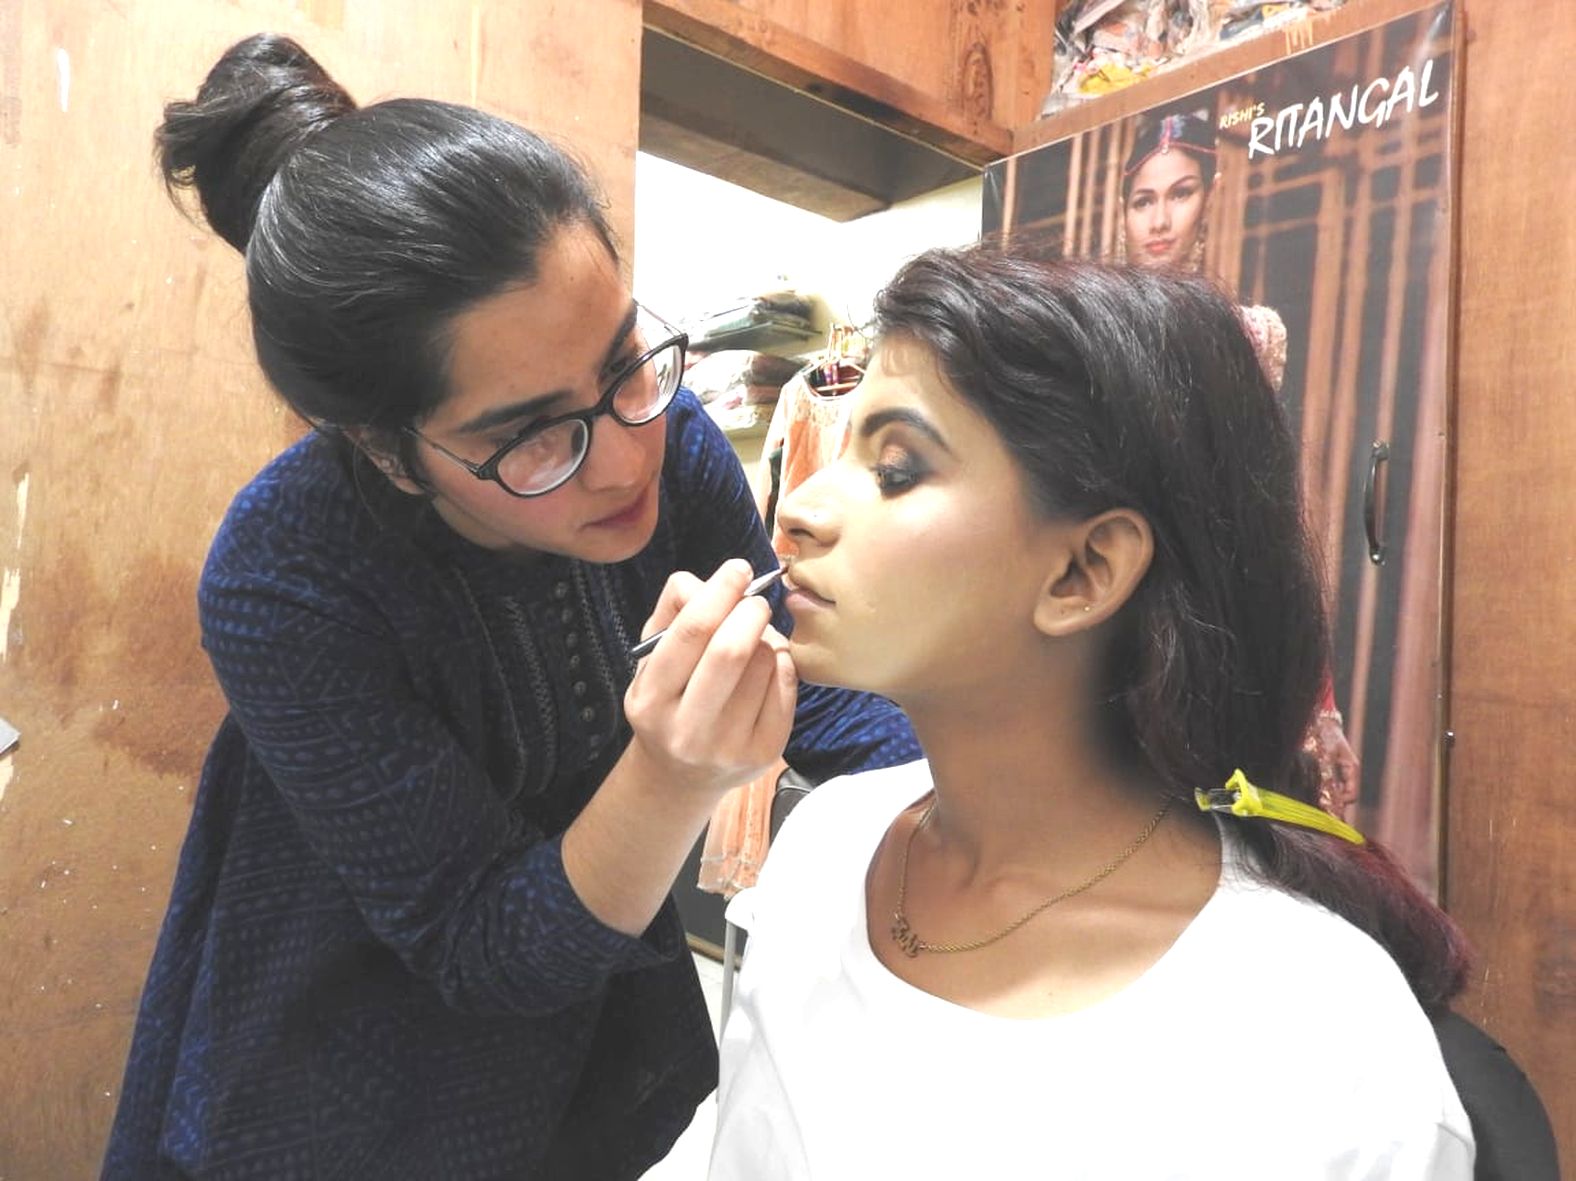 Burhanpur's Alfia now has become a make-up artist in Paris